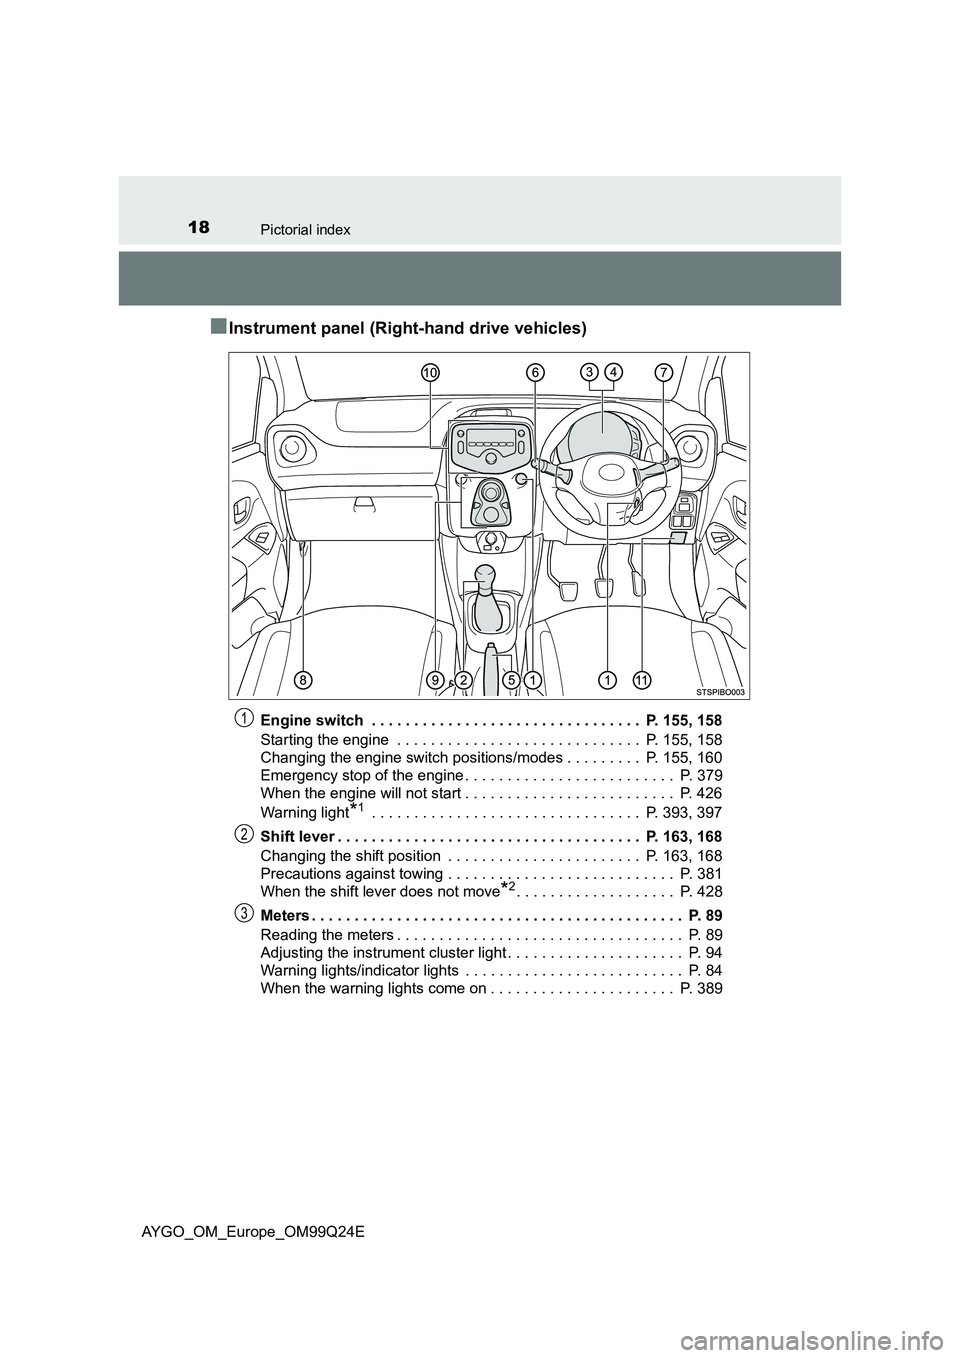 TOYOTA AYGO 2017  Owners Manual (in English) 18Pictorial index
AYGO_OM_Europe_OM99Q24E
■Instrument panel (Right-hand drive vehicles)
Engine switch  . . . . . . . . . . . . . . . . . . . . . . . . . . . . . . . .  P. 155, 158 
Starting the engi